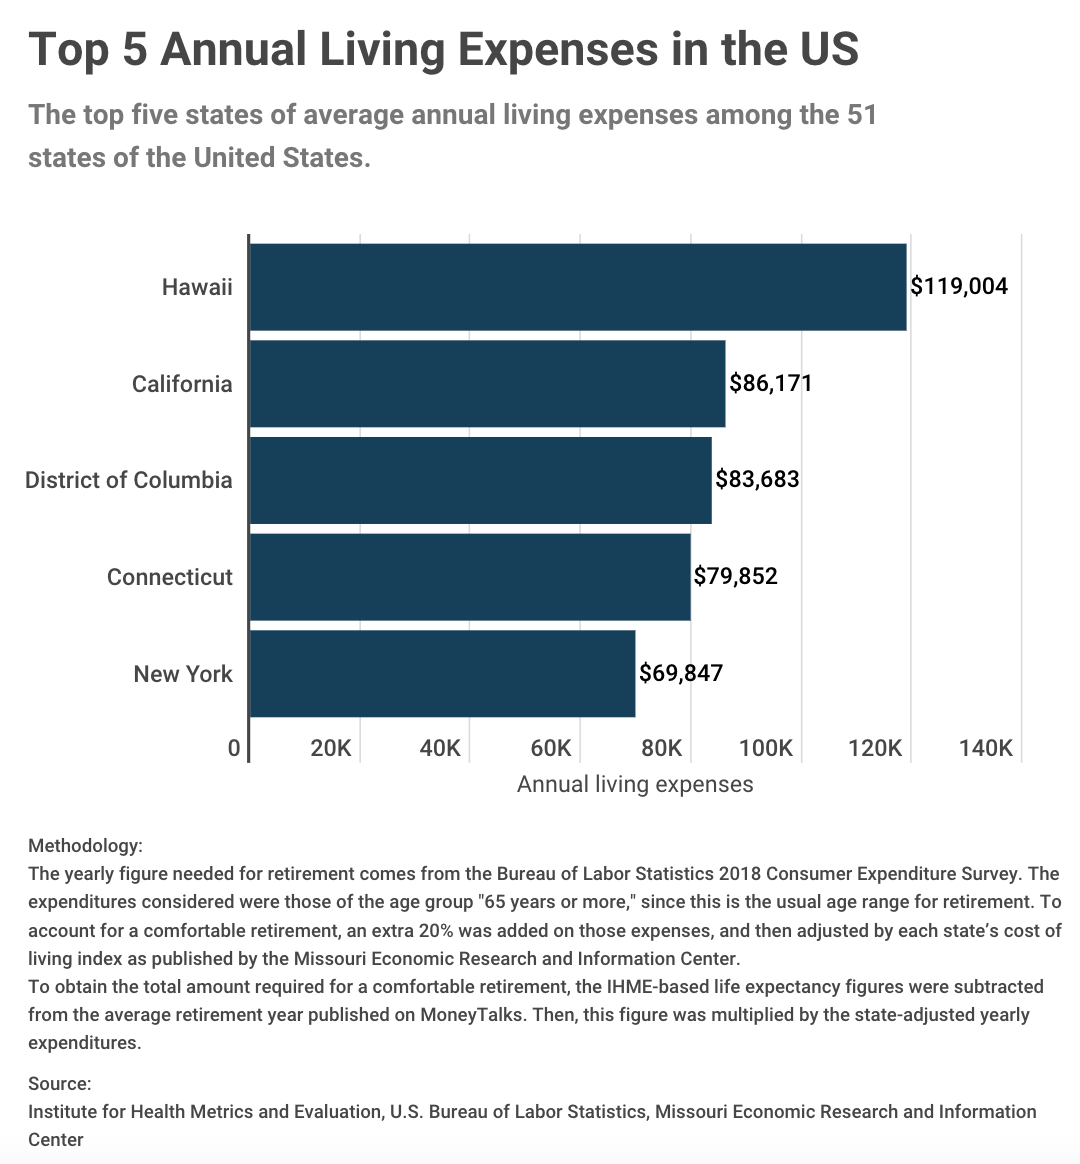 Top5 US states annual living expenses